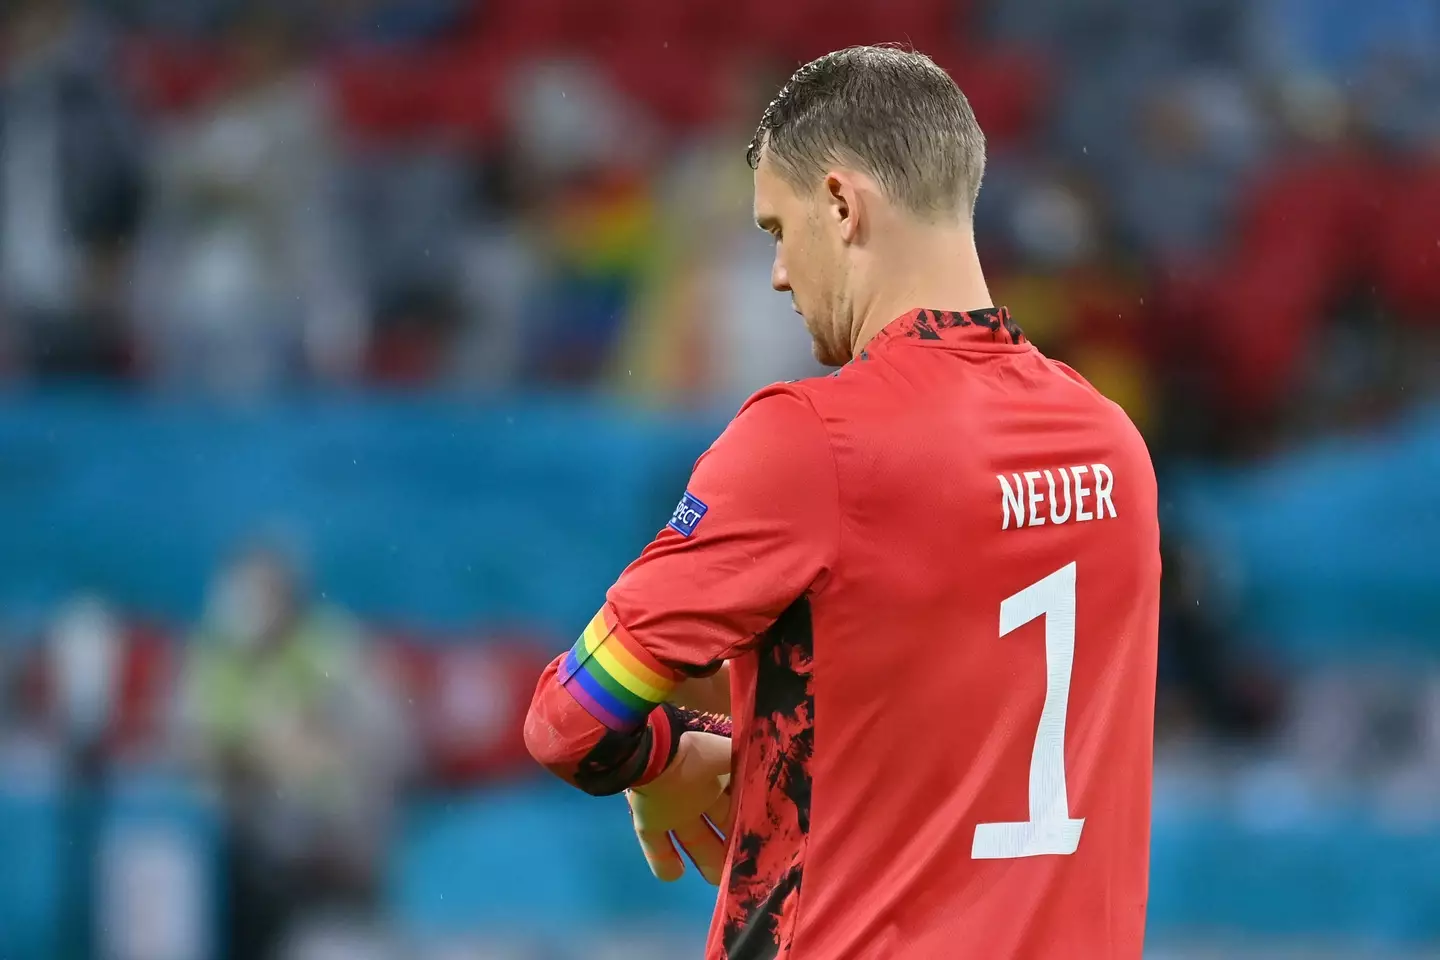 Manuel Neuer was praised during the Euros for showing support to the LGBTQ+ community with his rainbow armband. Image: PA Images